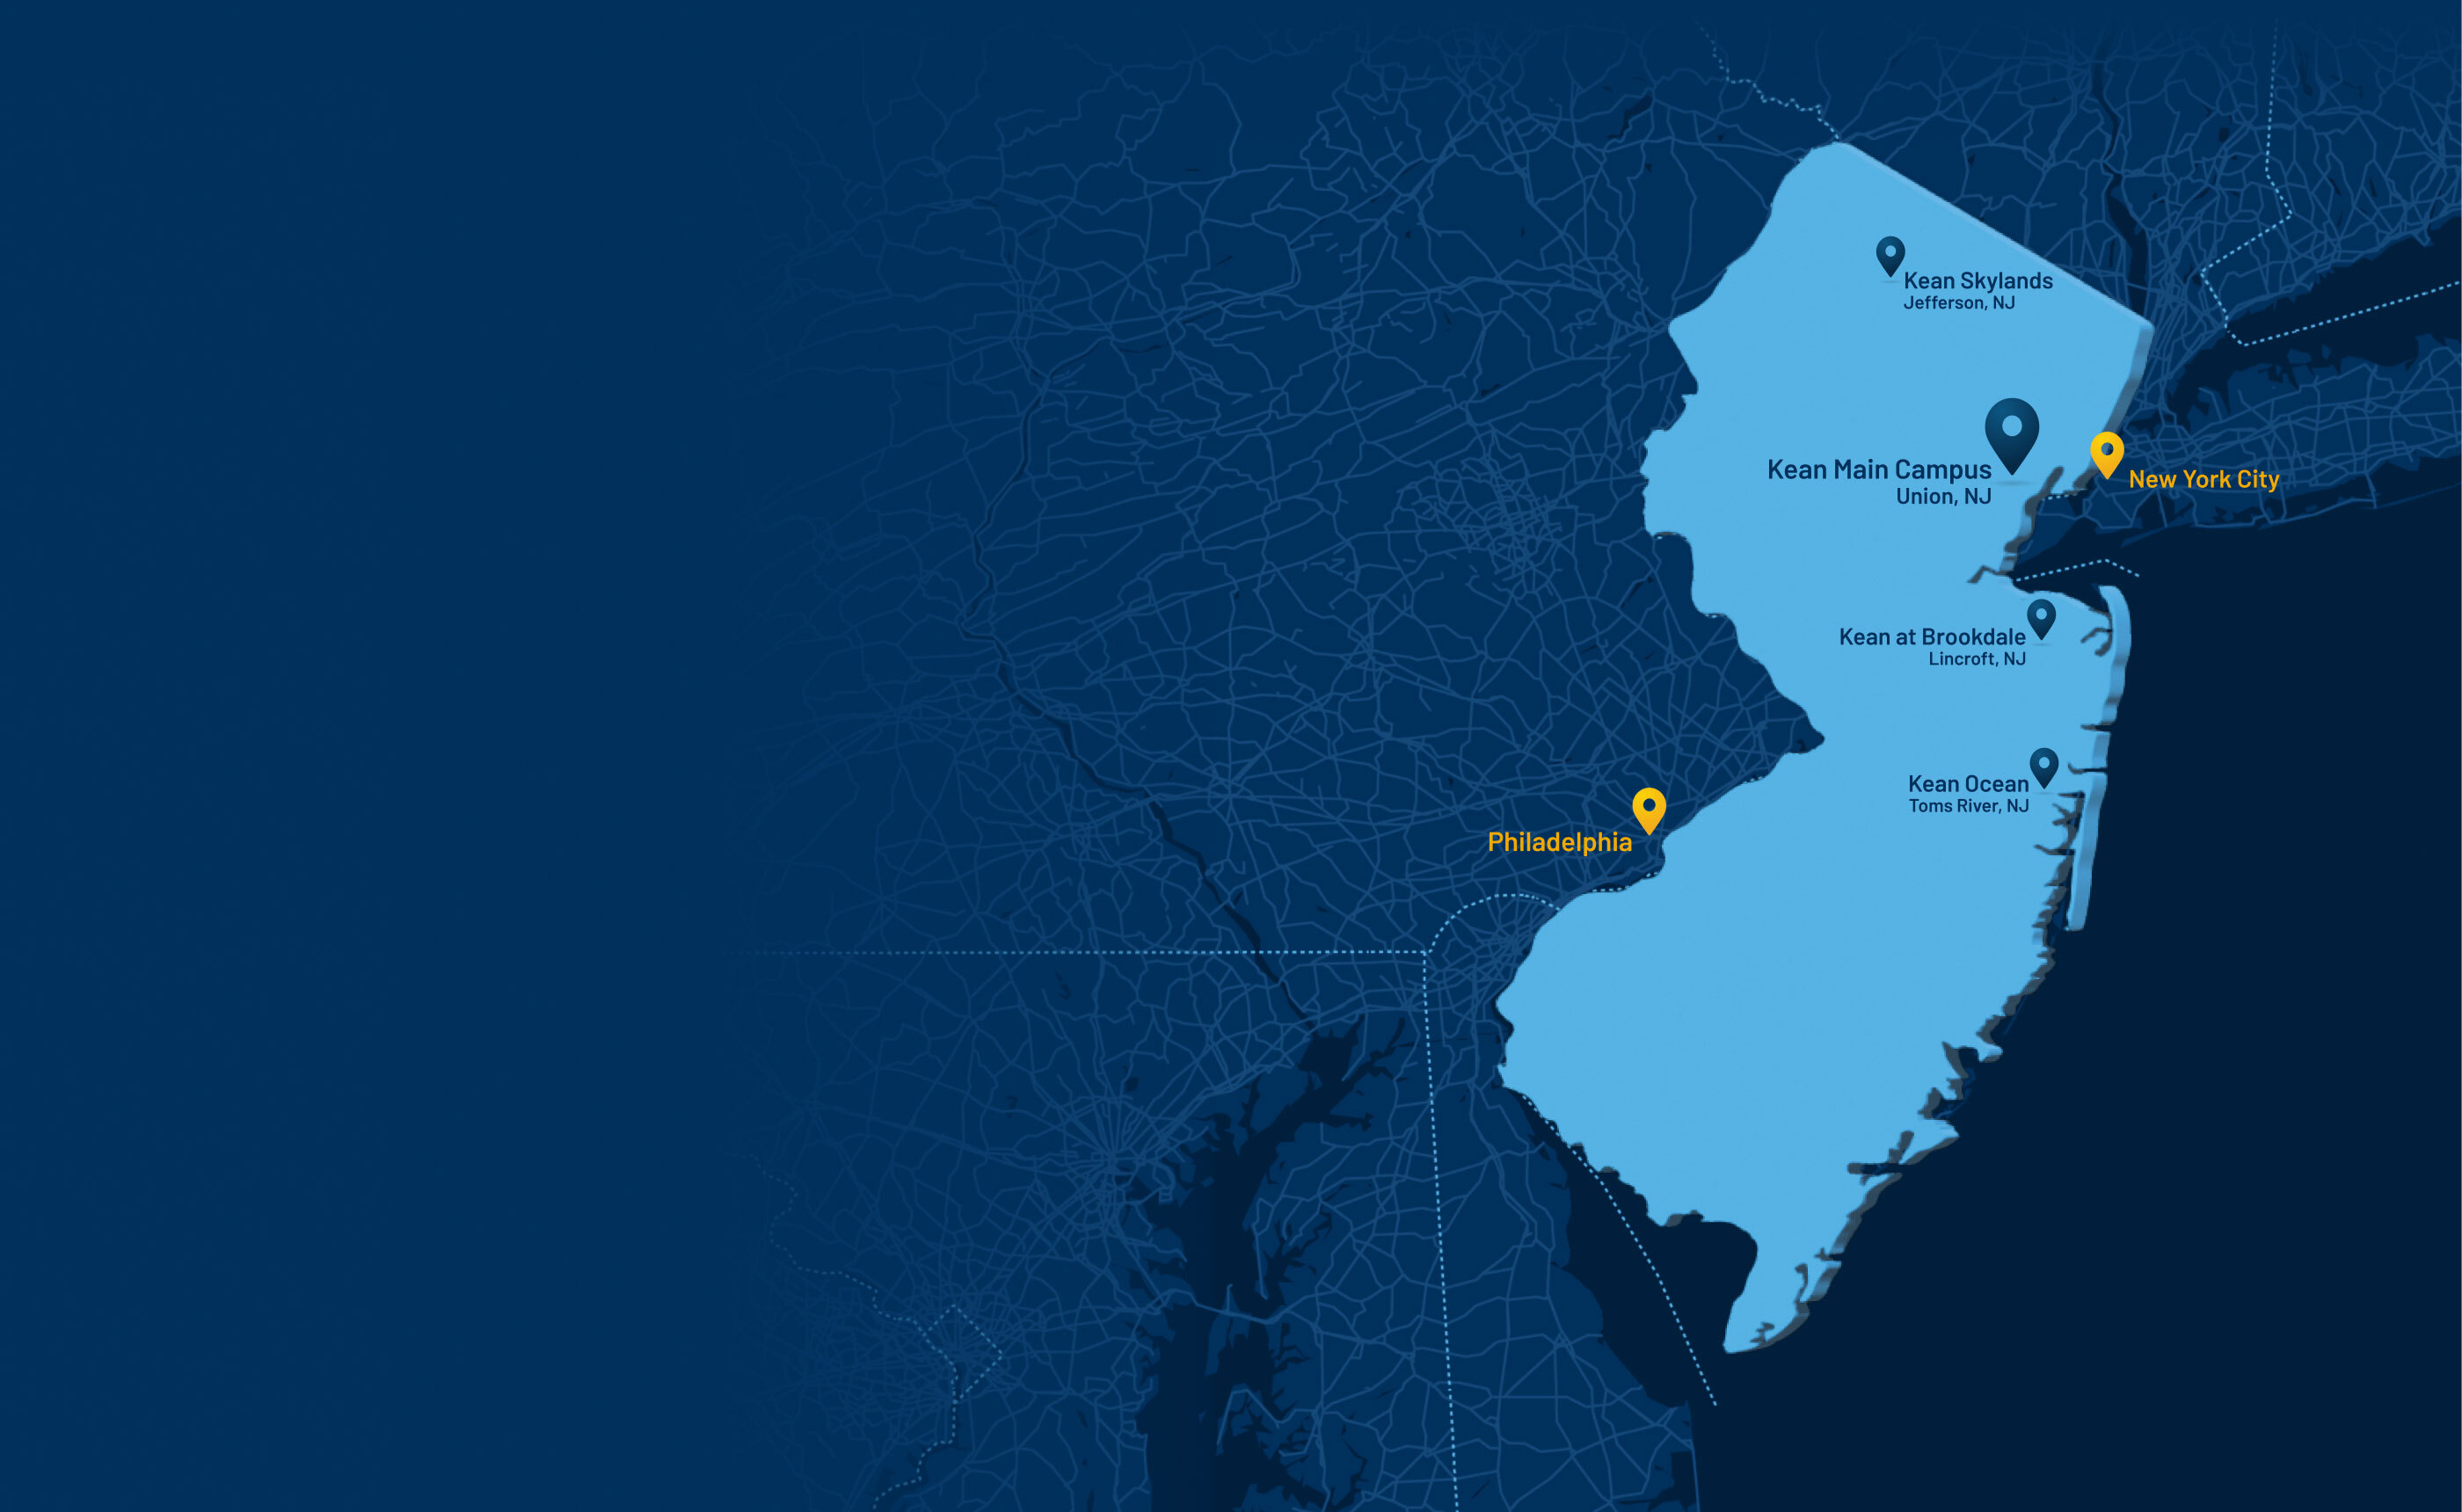 Map of New Jersey showing the four Kean campus locations and their proximity to New York City and Philadelphia